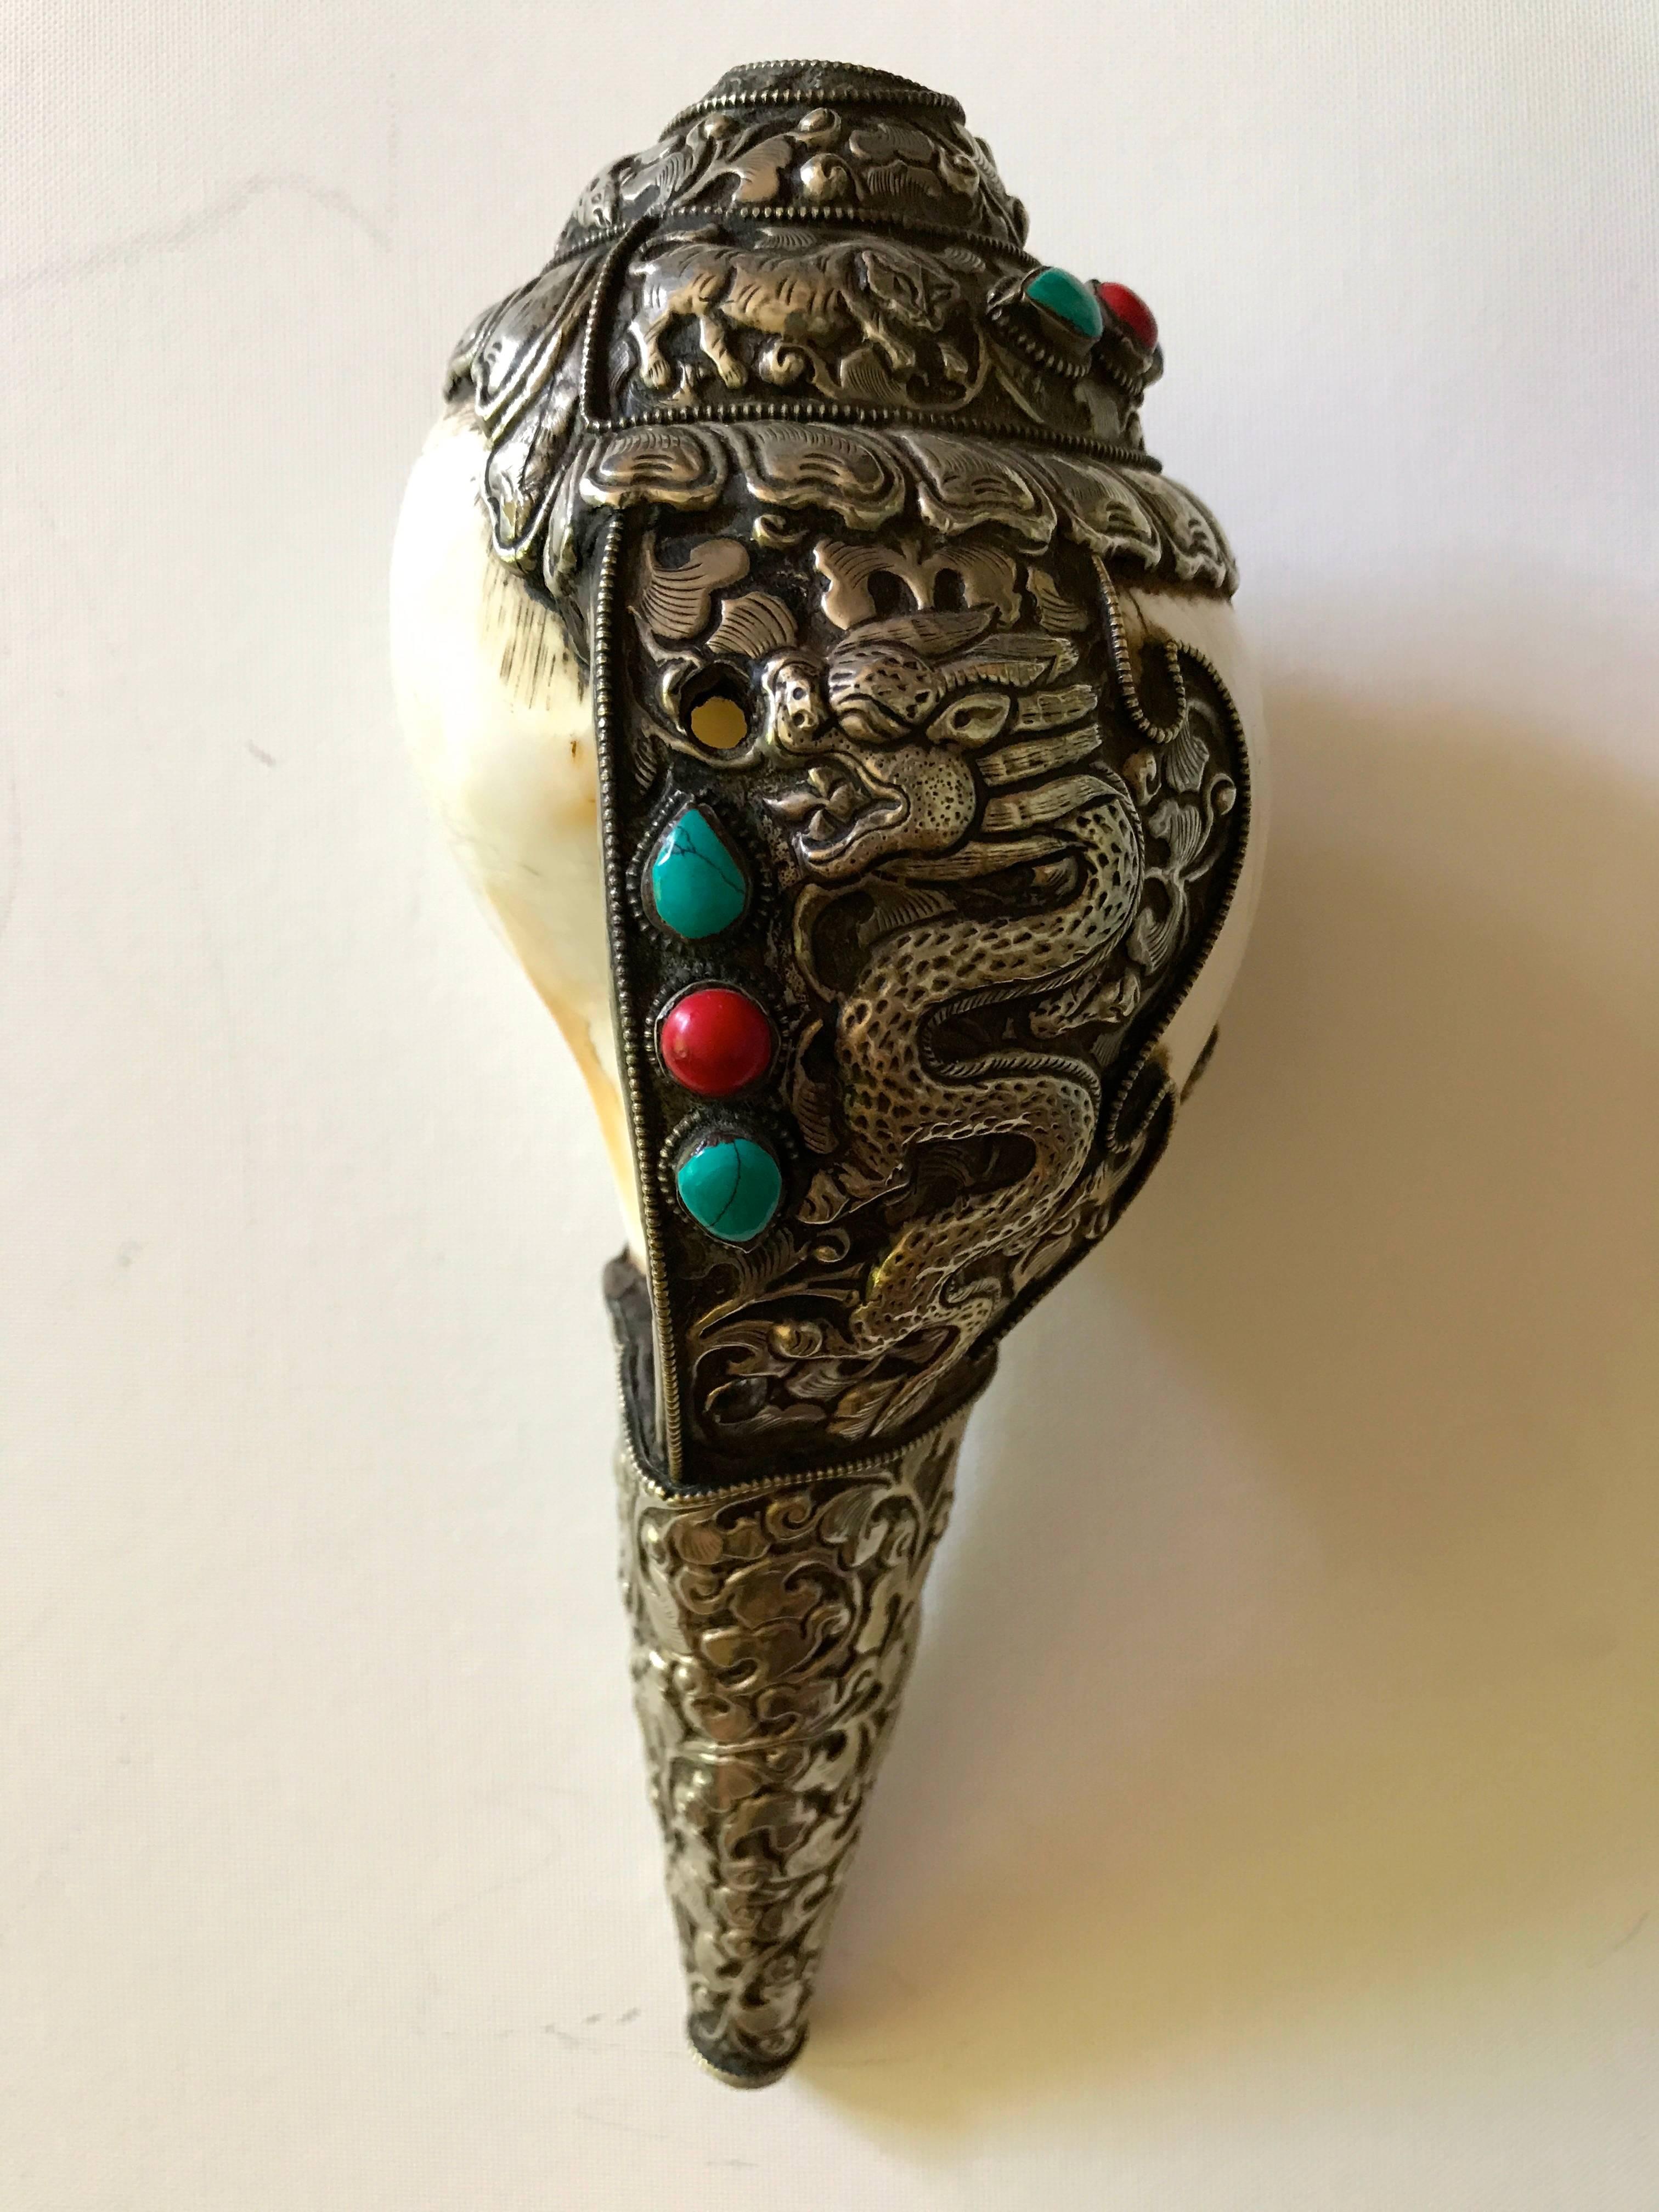 Tibetan ritual conch shell. Made with a Shankha (turbinella pyrum), that is a holy shell with religious importance in Hinduism and Buddhism, is used as a trumpet in rituals. The shell is part covered with repoussè and fine chiseled silver with